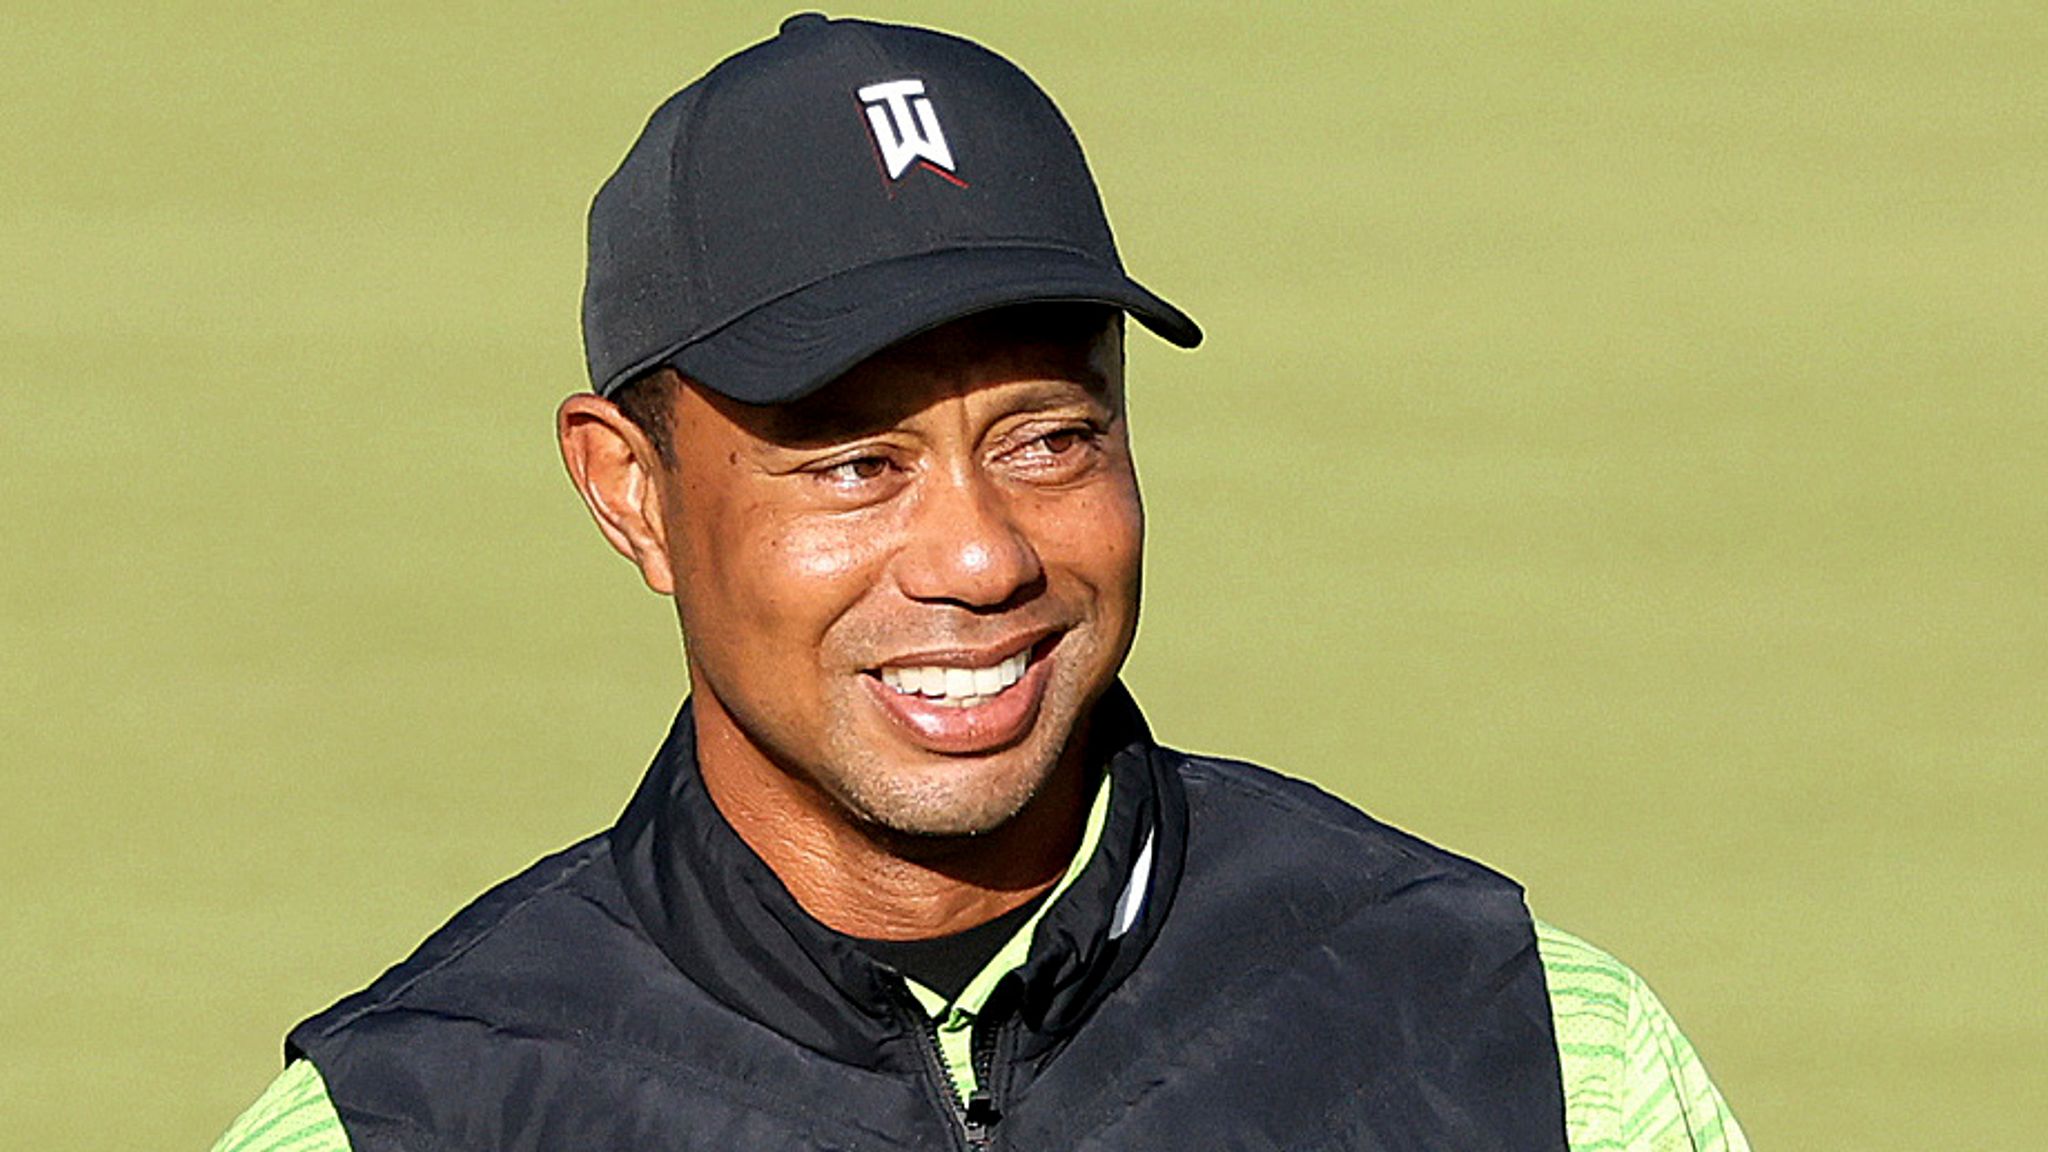 Tiger Woods to play in the PNC Championship with his son, live on Sky Sports in December Golf News Sky Sports